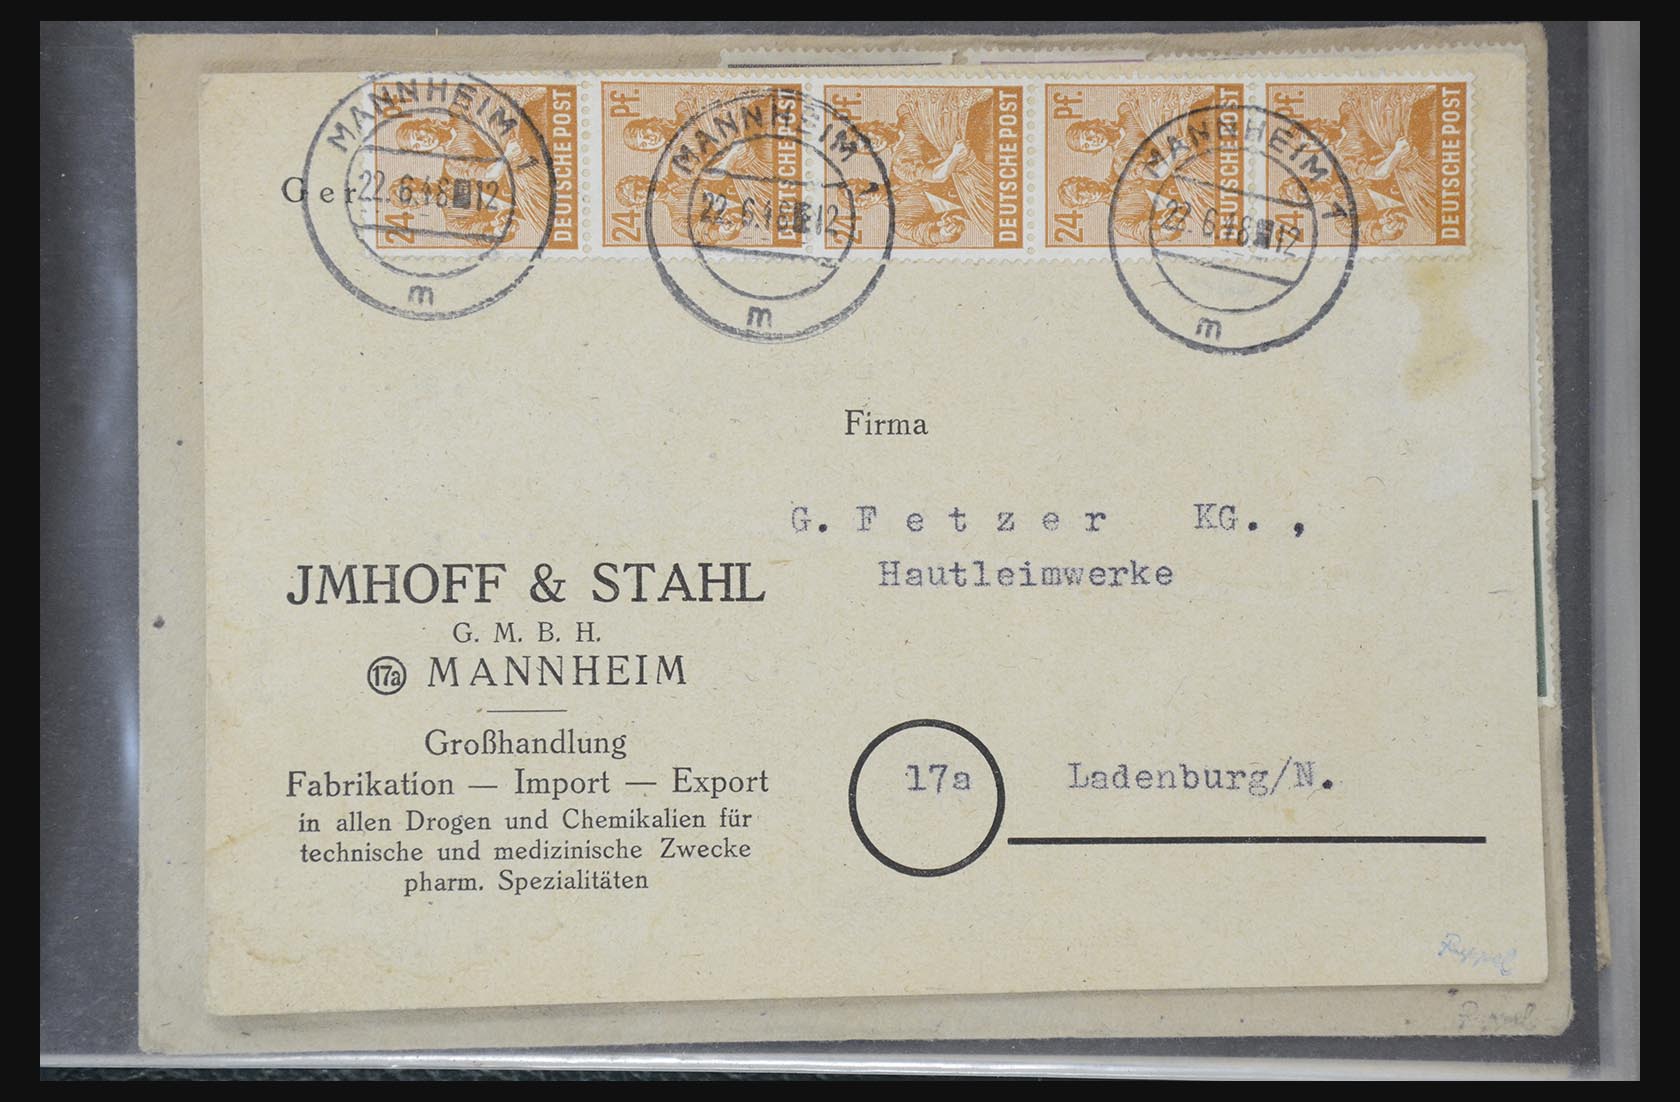 31581 024 - 31581 Germany covers and FDC's 1945-1981.